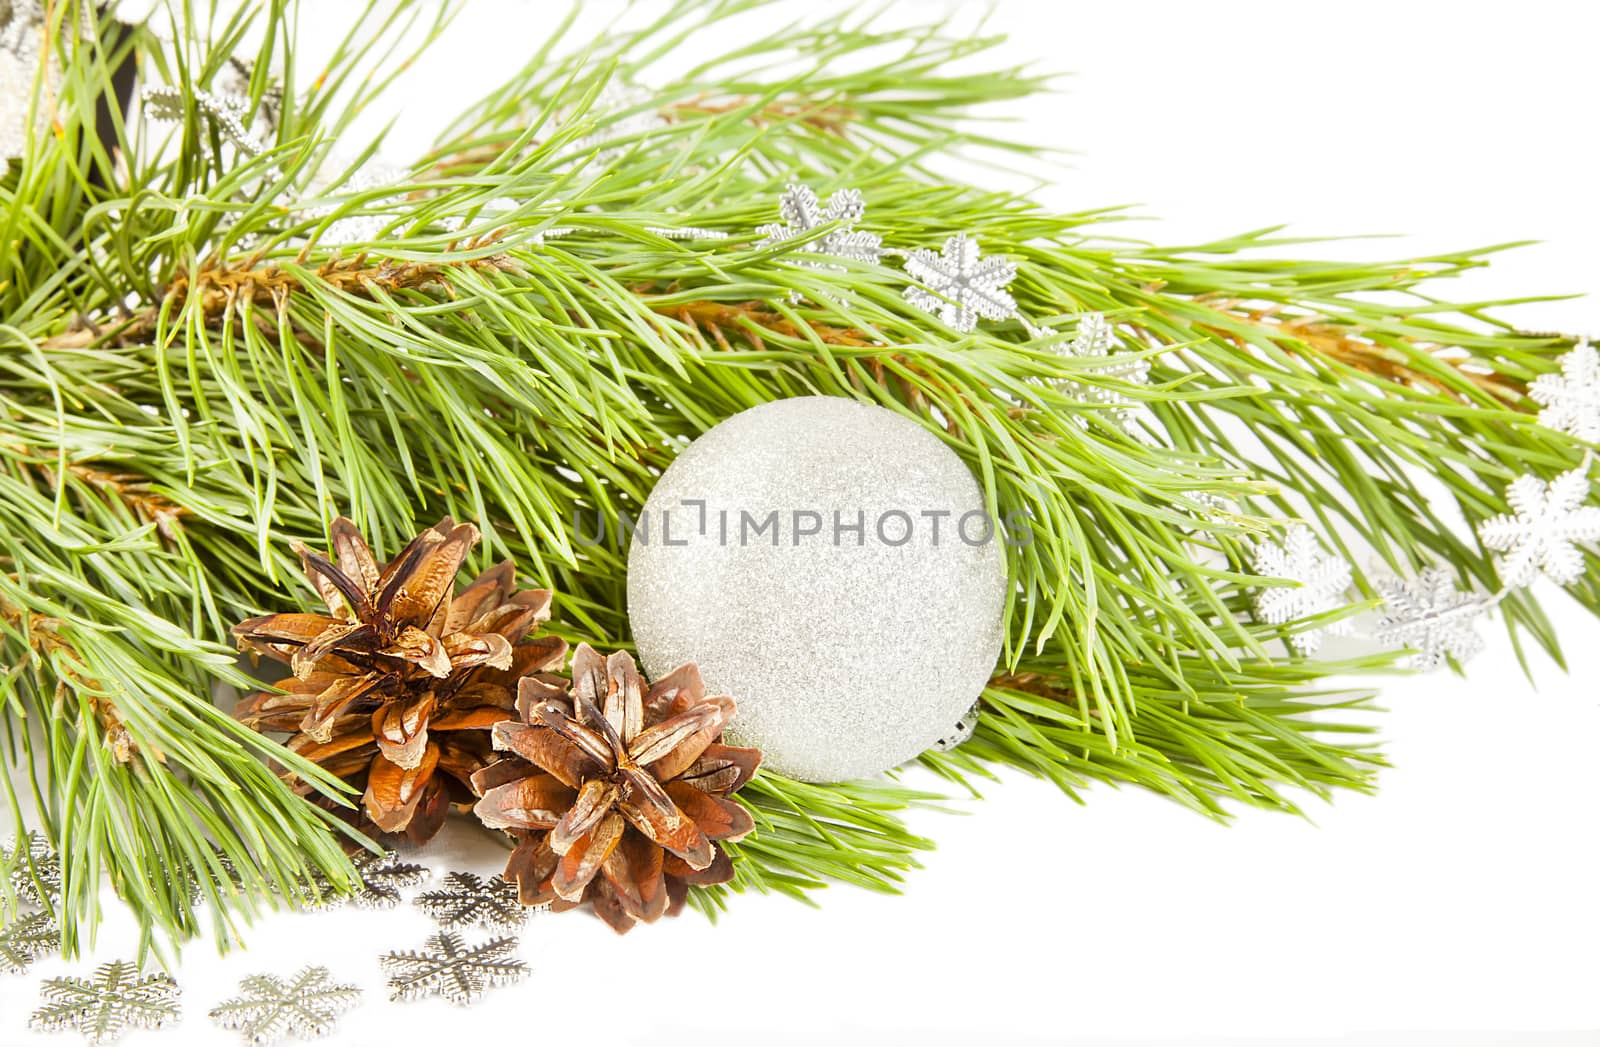 New year composition with fir tree, cones and silver ball by RawGroup